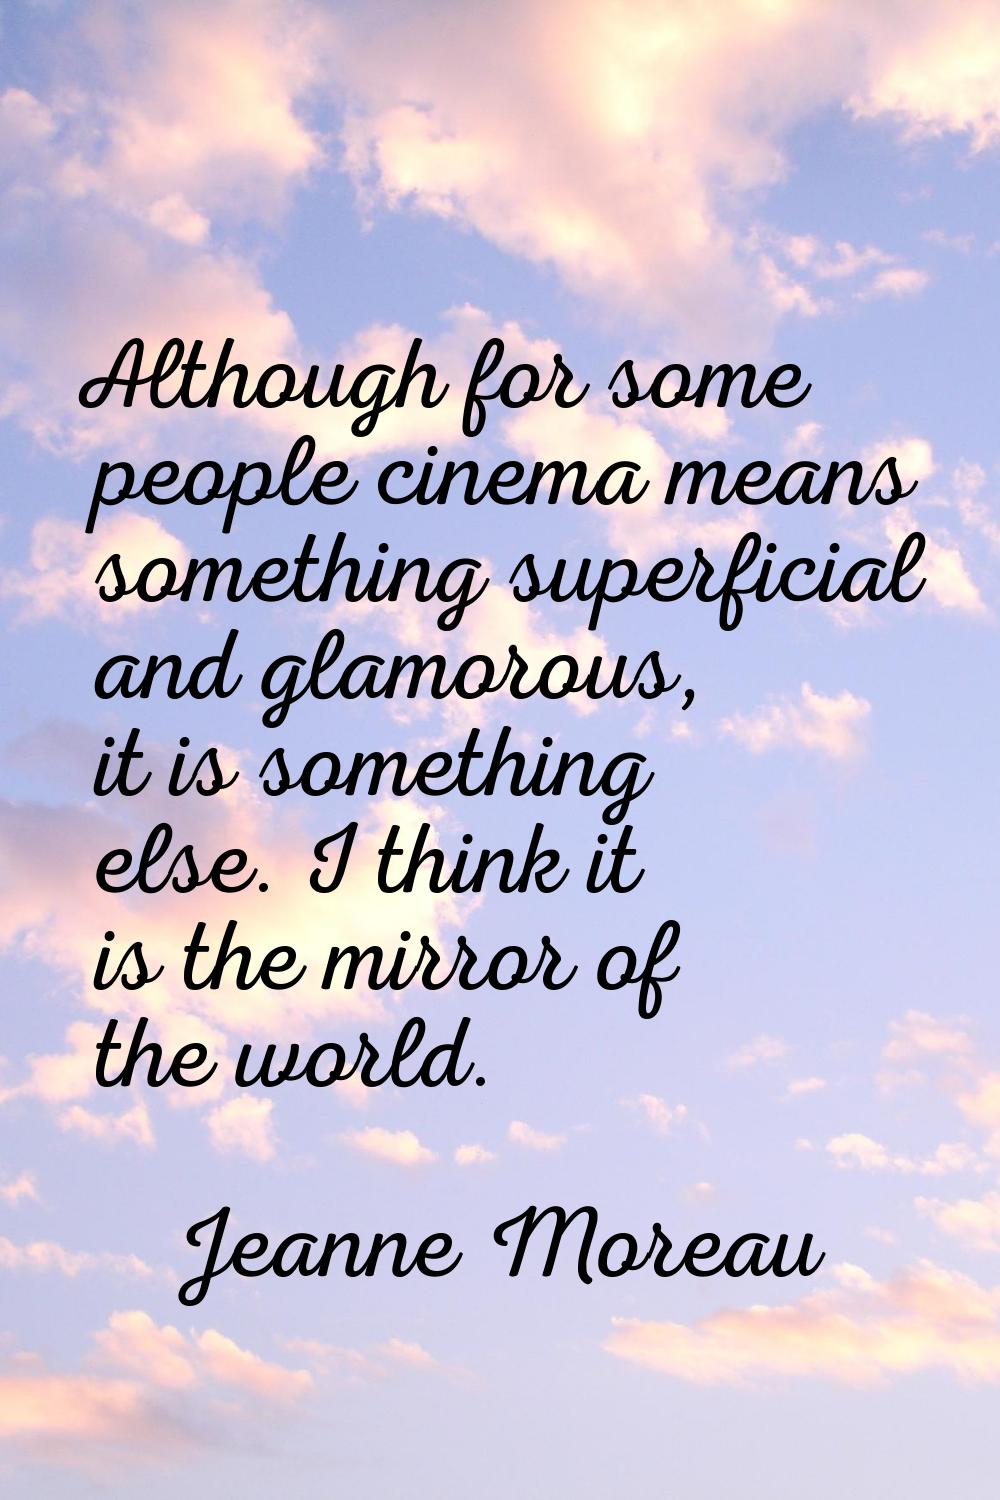 Although for some people cinema means something superficial and glamorous, it is something else. I 